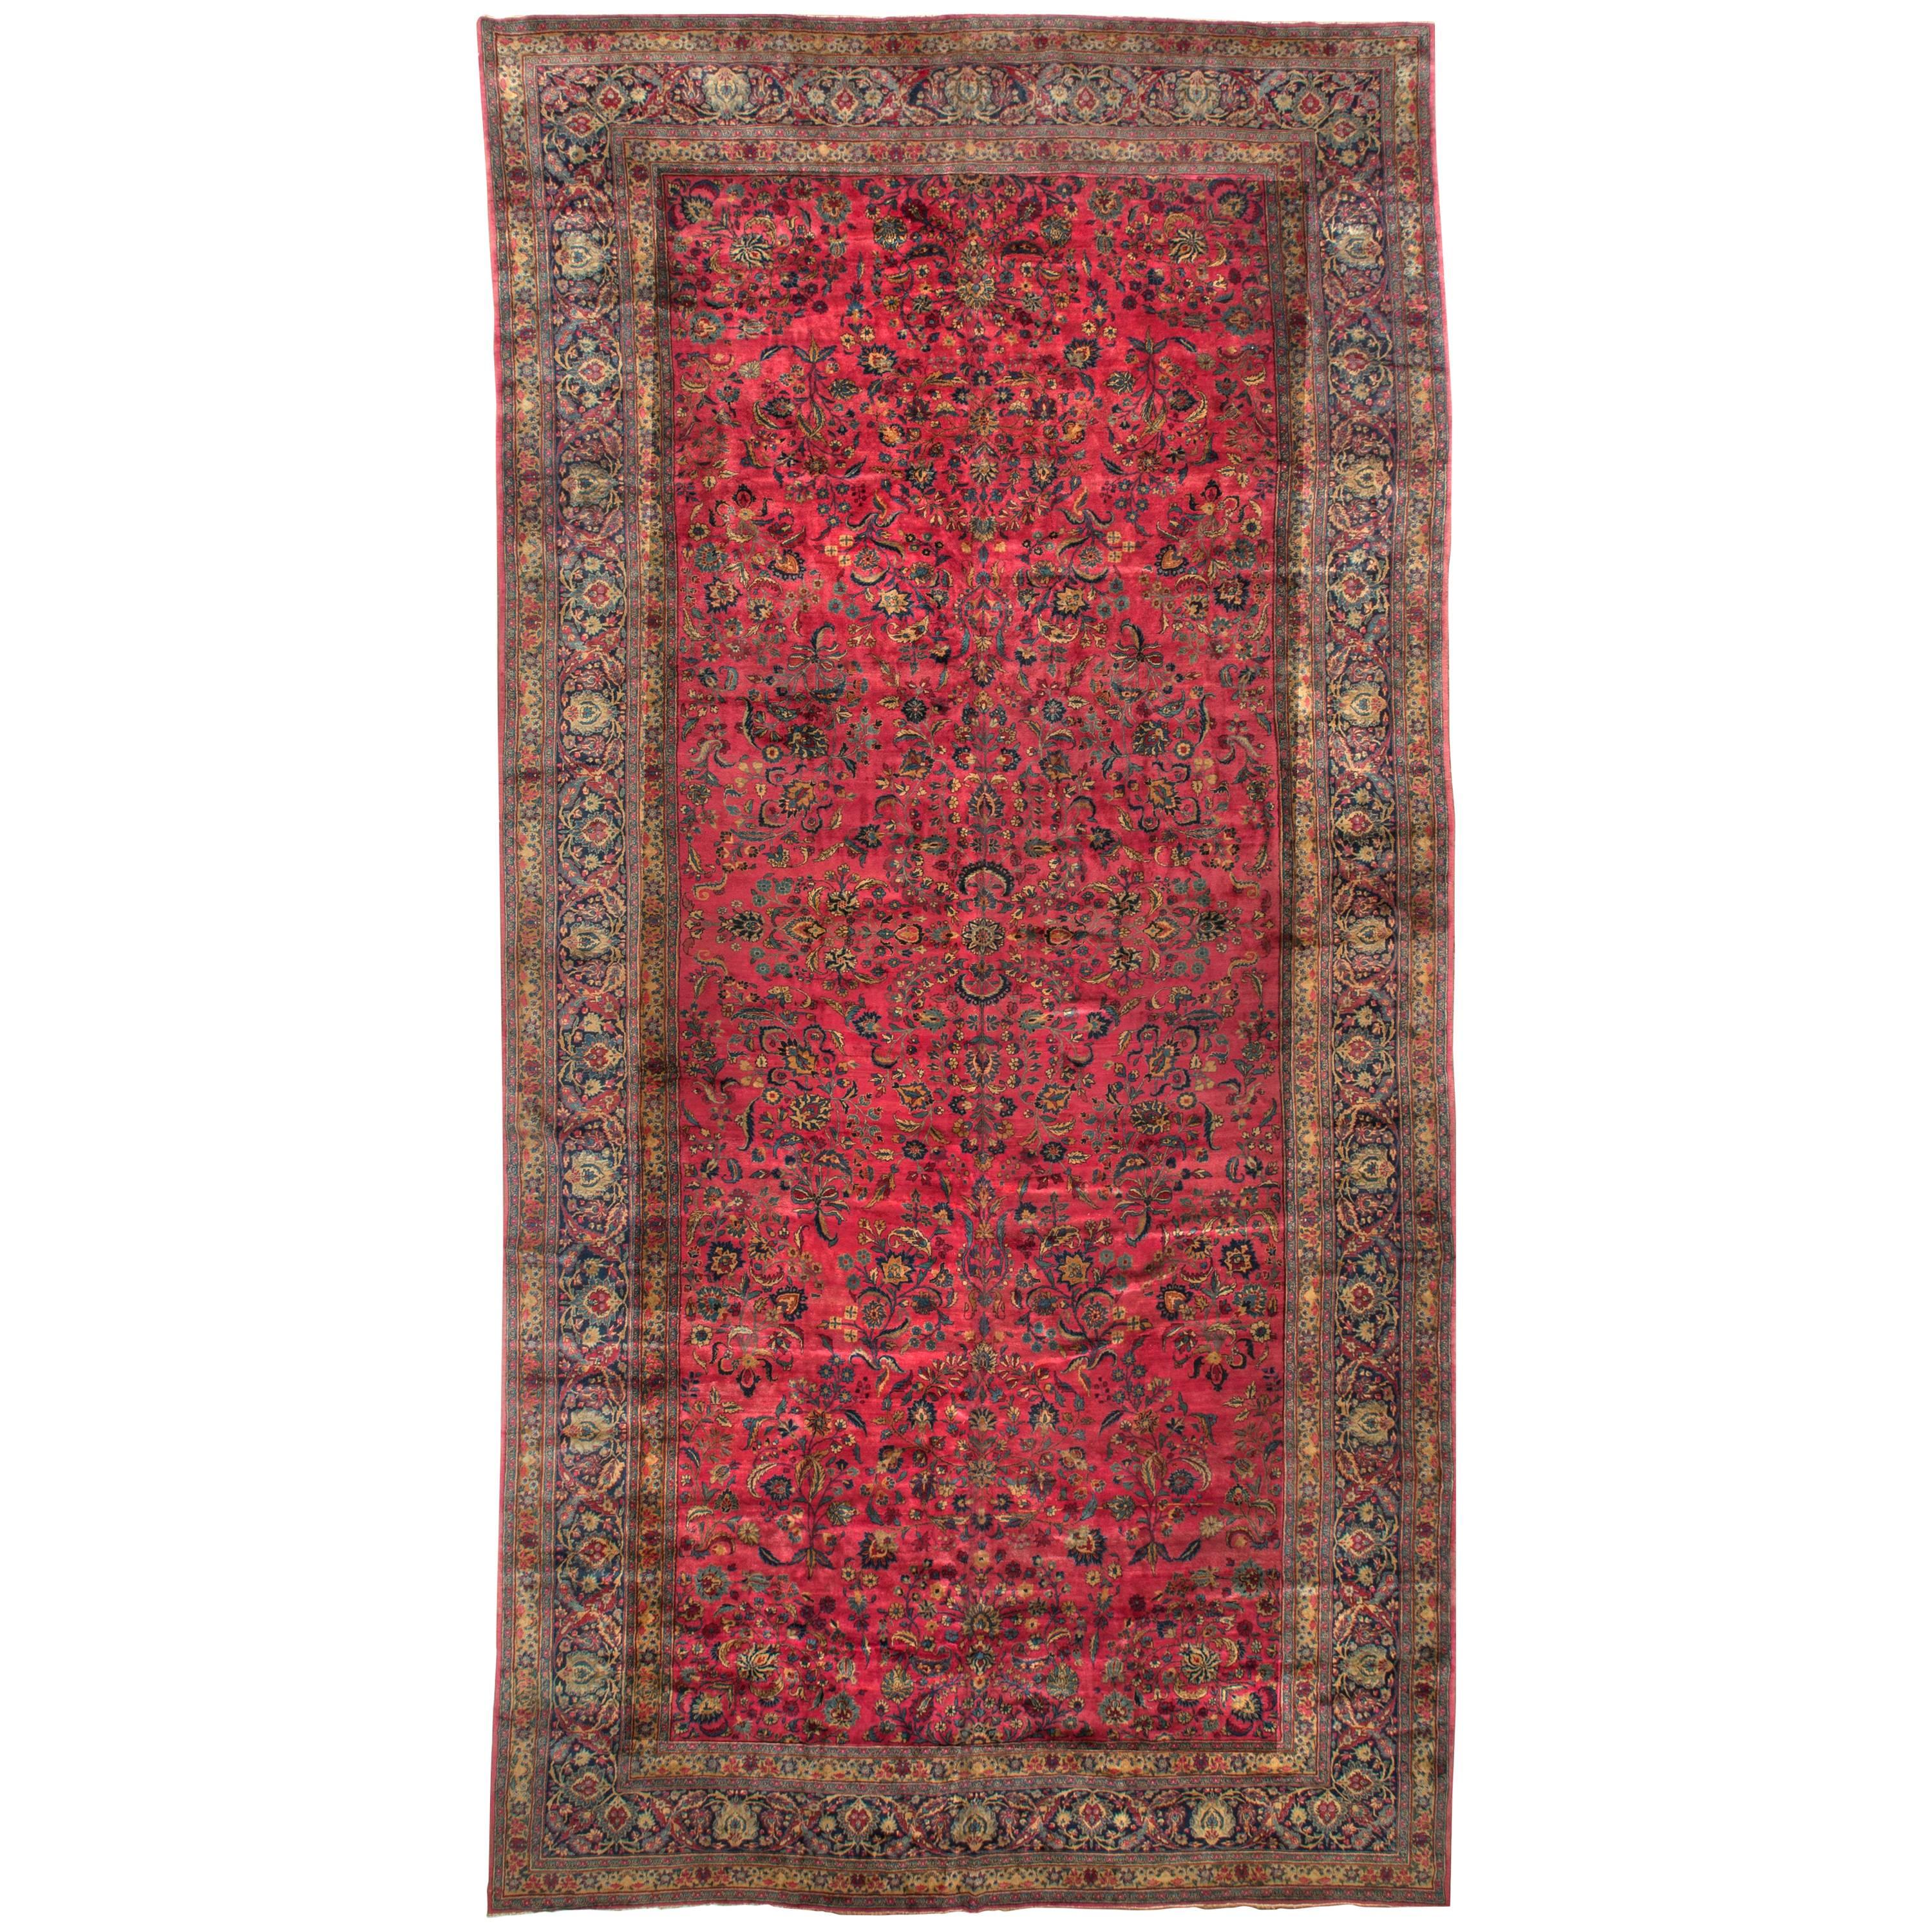 Oversize Persian Meshad Rug Carpet Circa 1900 14'8 x 28'10 For Sale